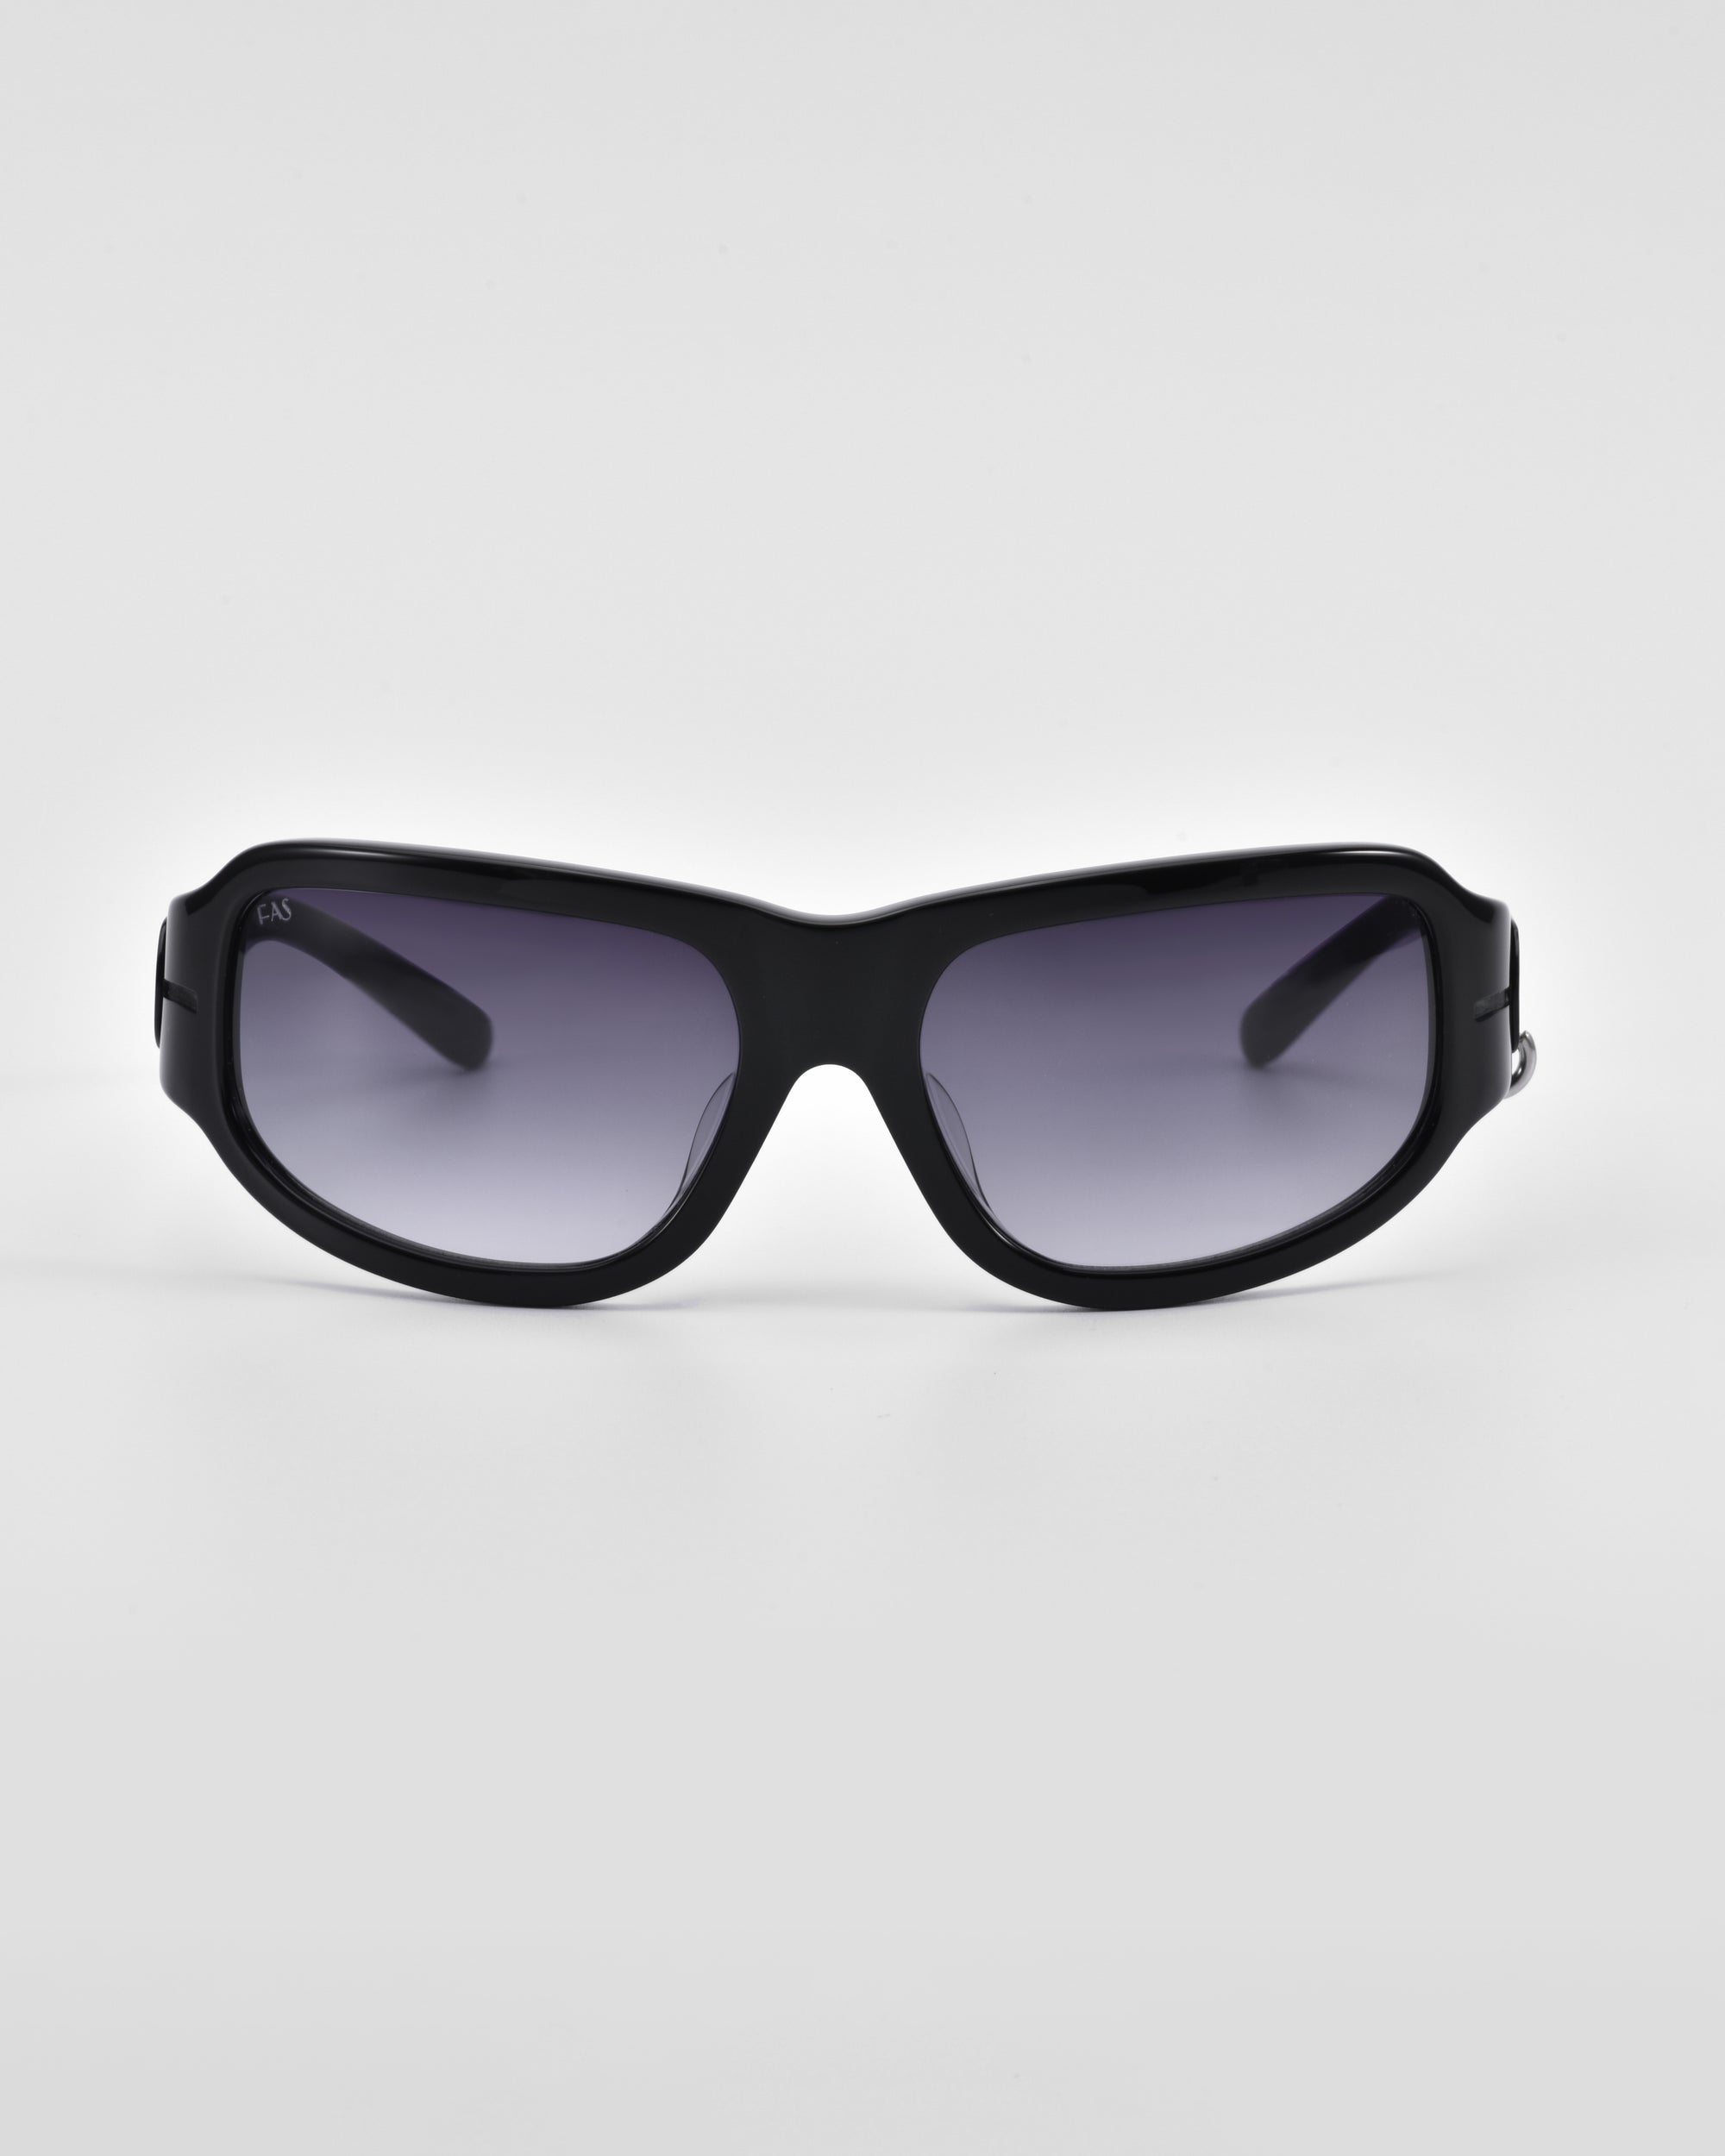 A pair of black For Art&#39;s Sake® Raven sunglasses with dark tinted lenses is centered against a plain white background. The frames are slightly curved with a sleek design, and the temples are thick and straight, reminiscent of the Y2K wrap sunglasses trend.